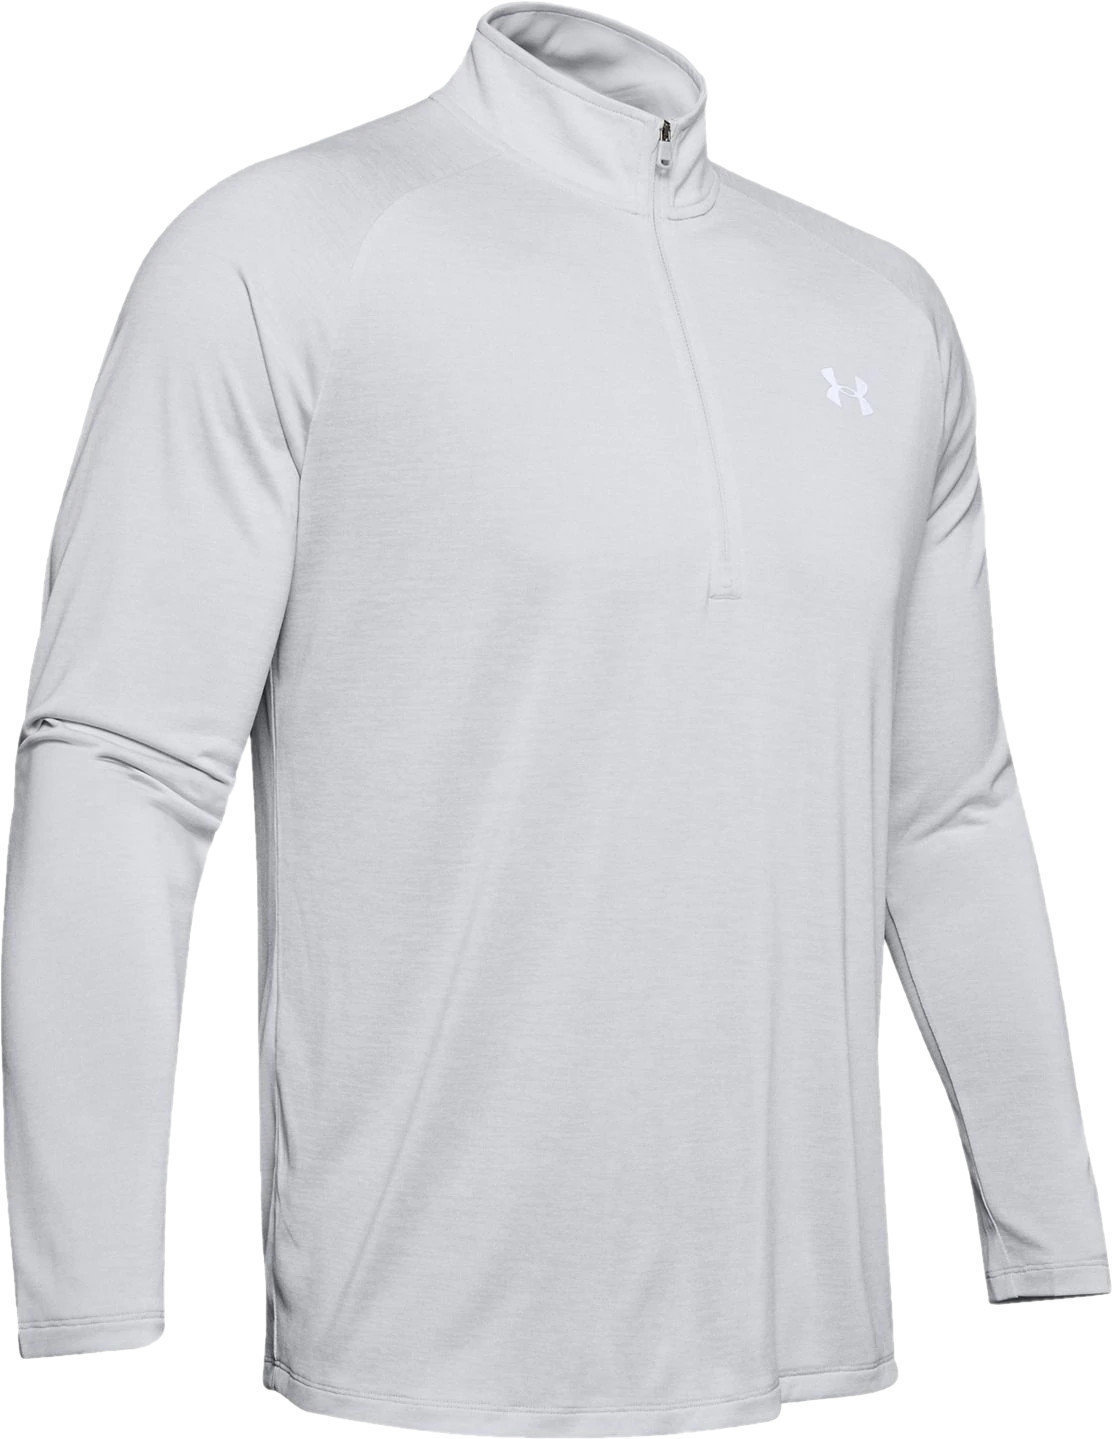 Pulover s kapuco/Pulover Under Armour Men's UA Tech 2.0 1/2 Zip Long Sleeve Halo Gray XL